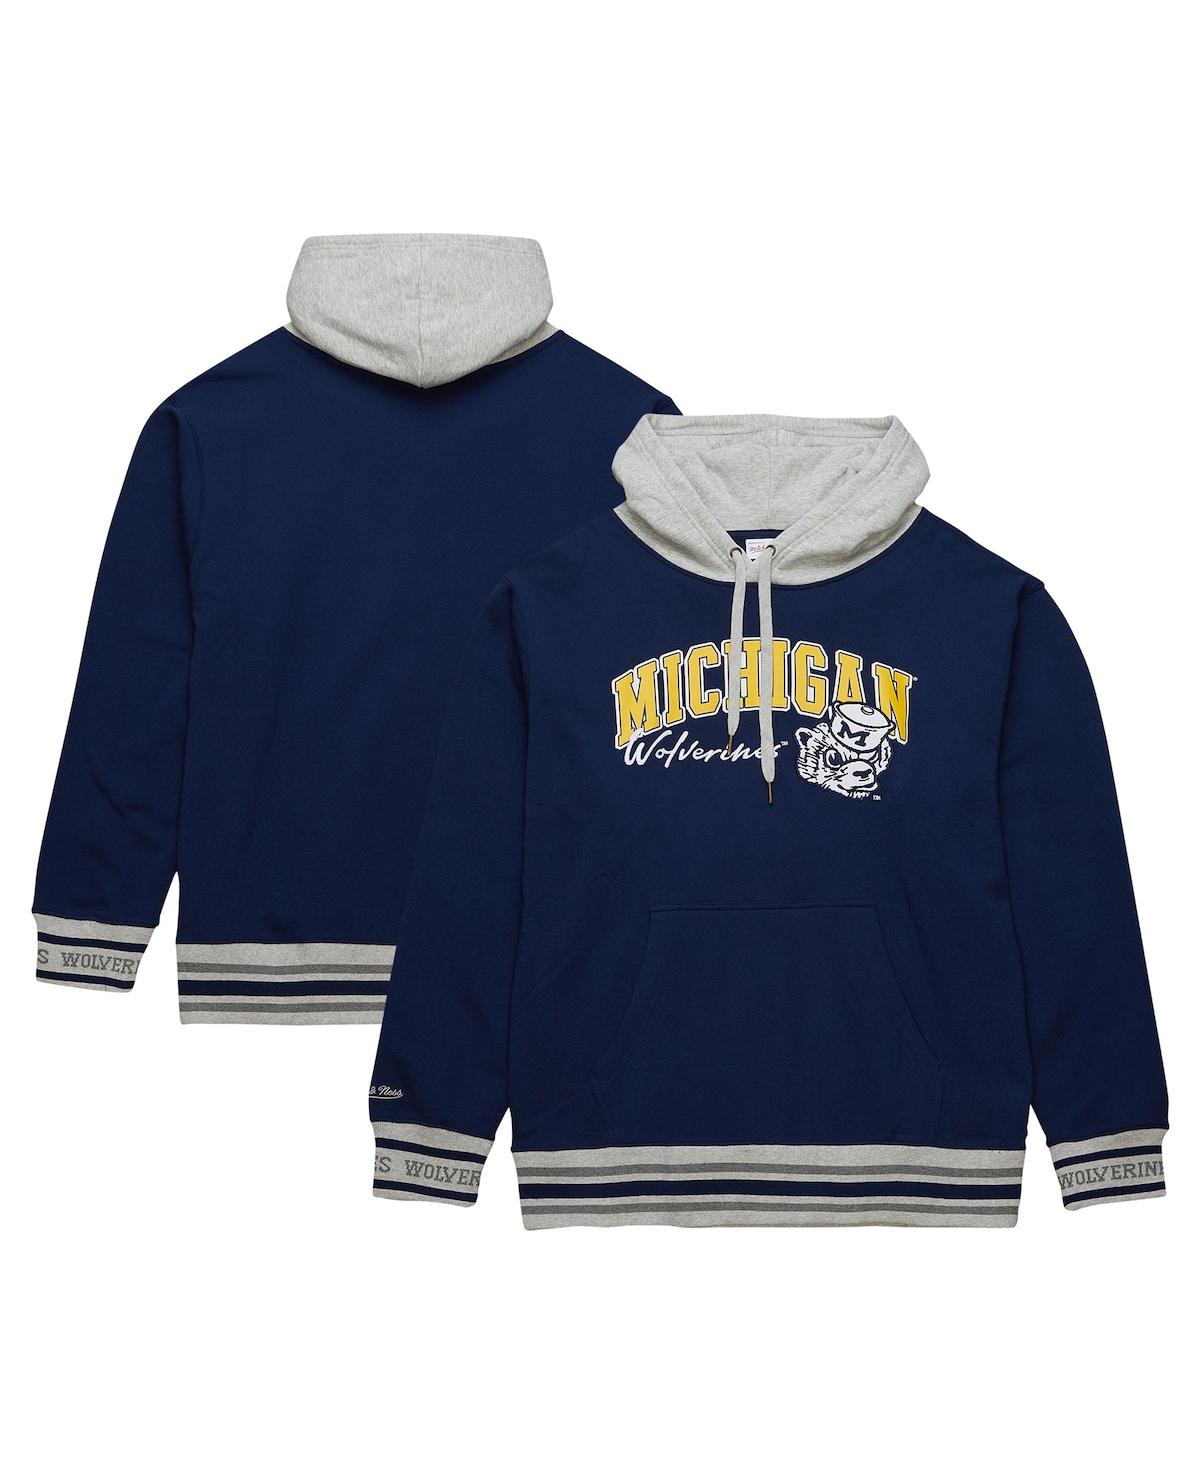 Mitchell Ness Men's Navy Michigan Wolverines Arched Fleece Pullover Hoodie - Navy